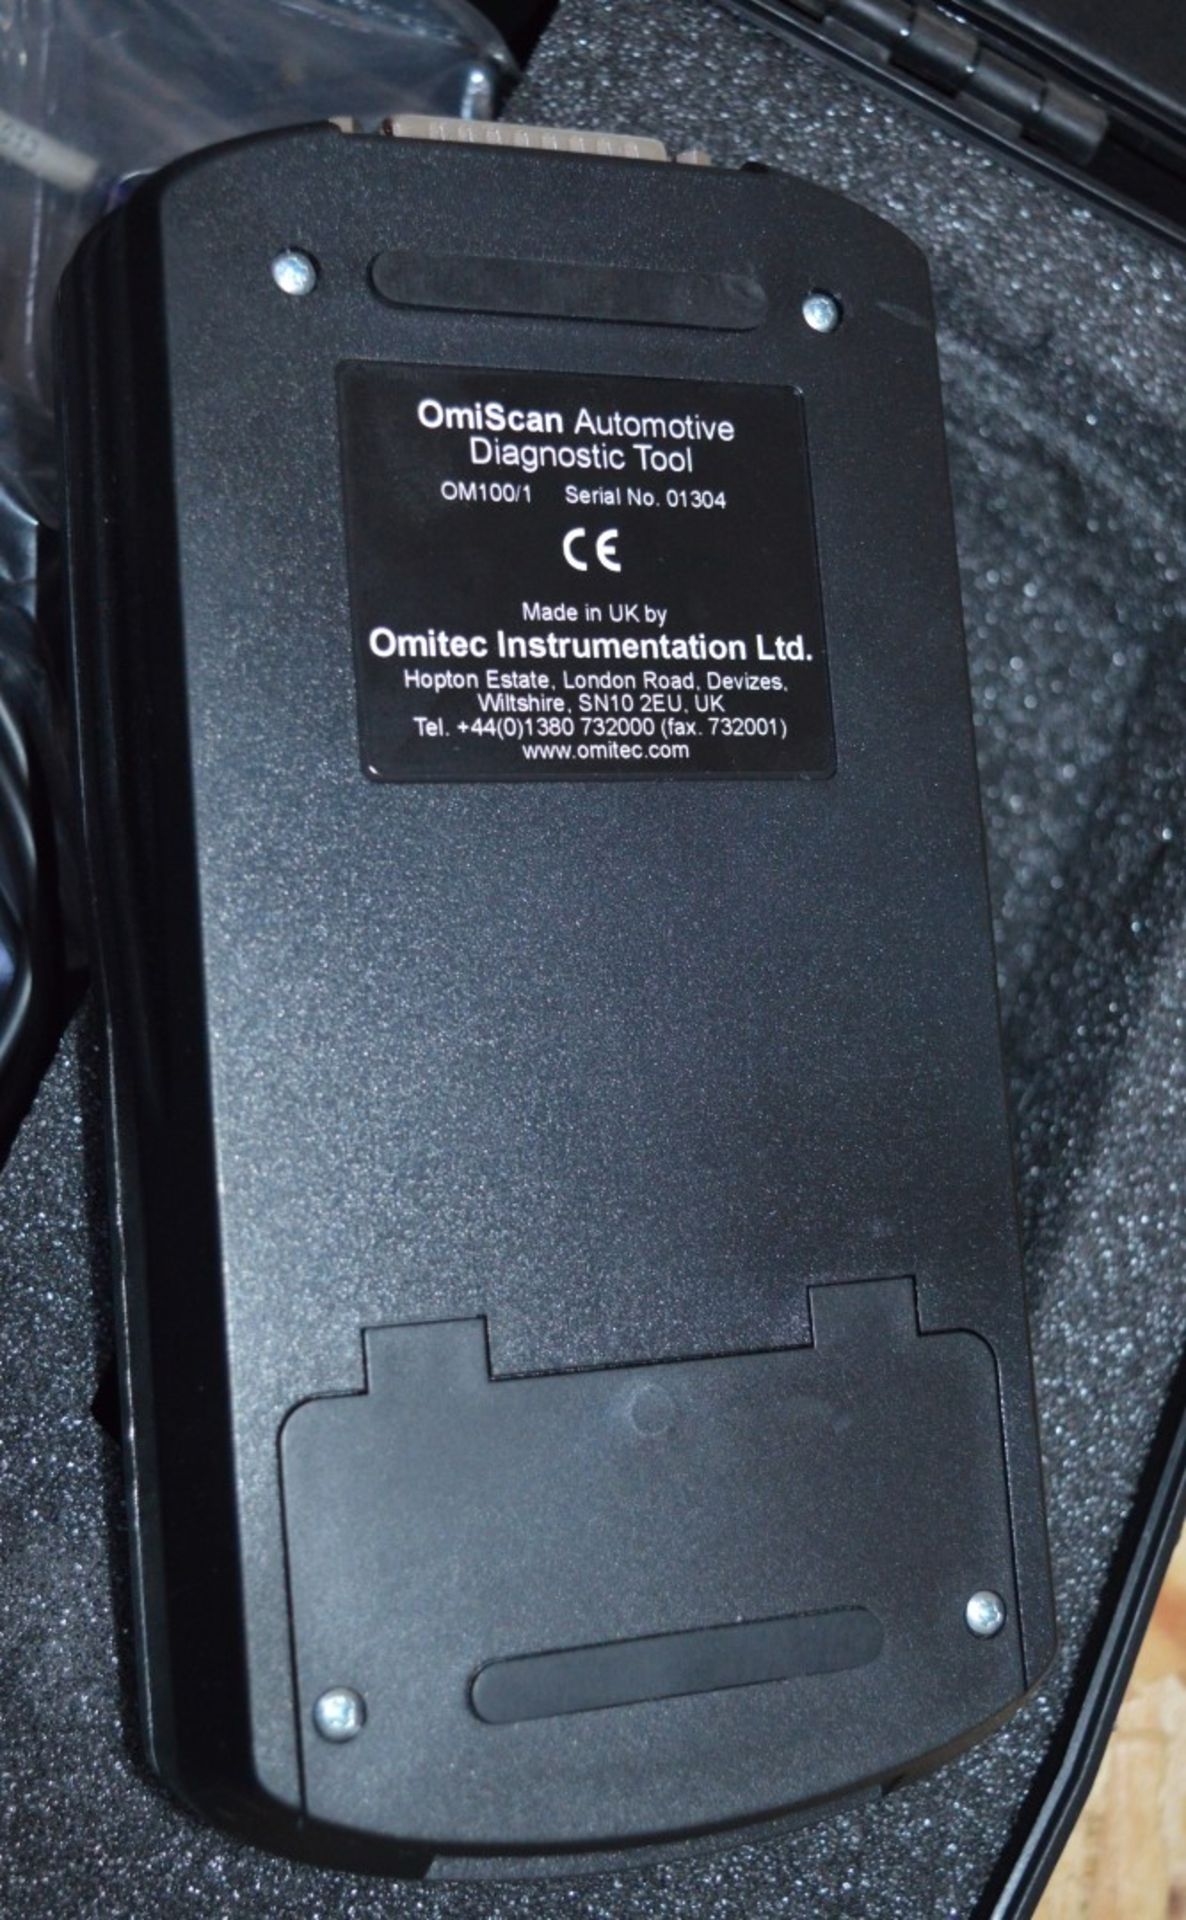 1 x Omitec OmiScan Automotive Diagnostic Tool - Model OM100/1 - Includes Carry Case, User Manual, - Image 5 of 7